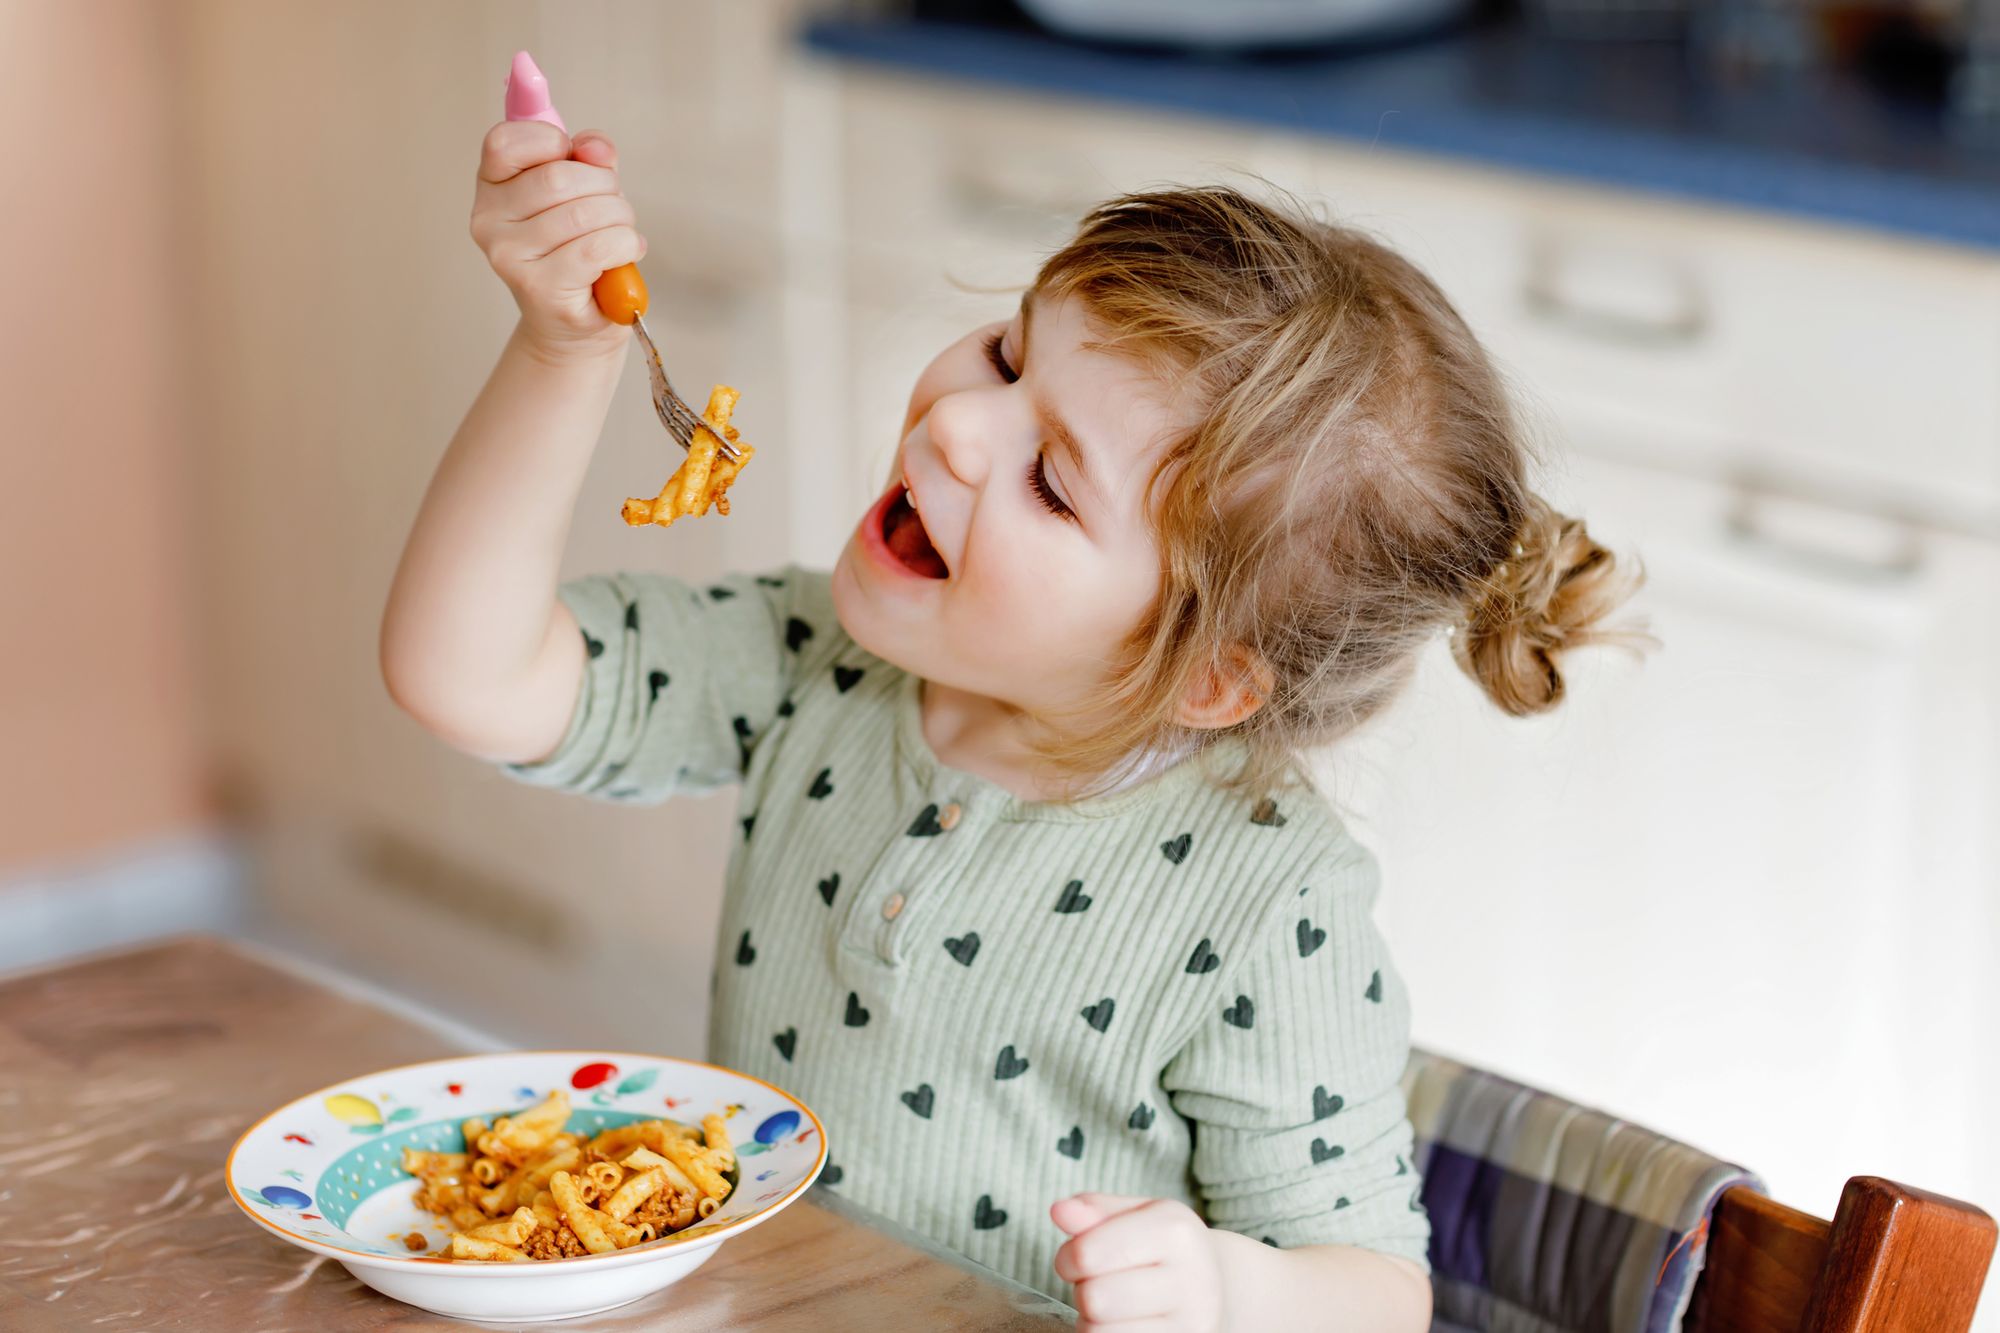 Feeding Accessories for Toddlers to Make Mealtime Easy